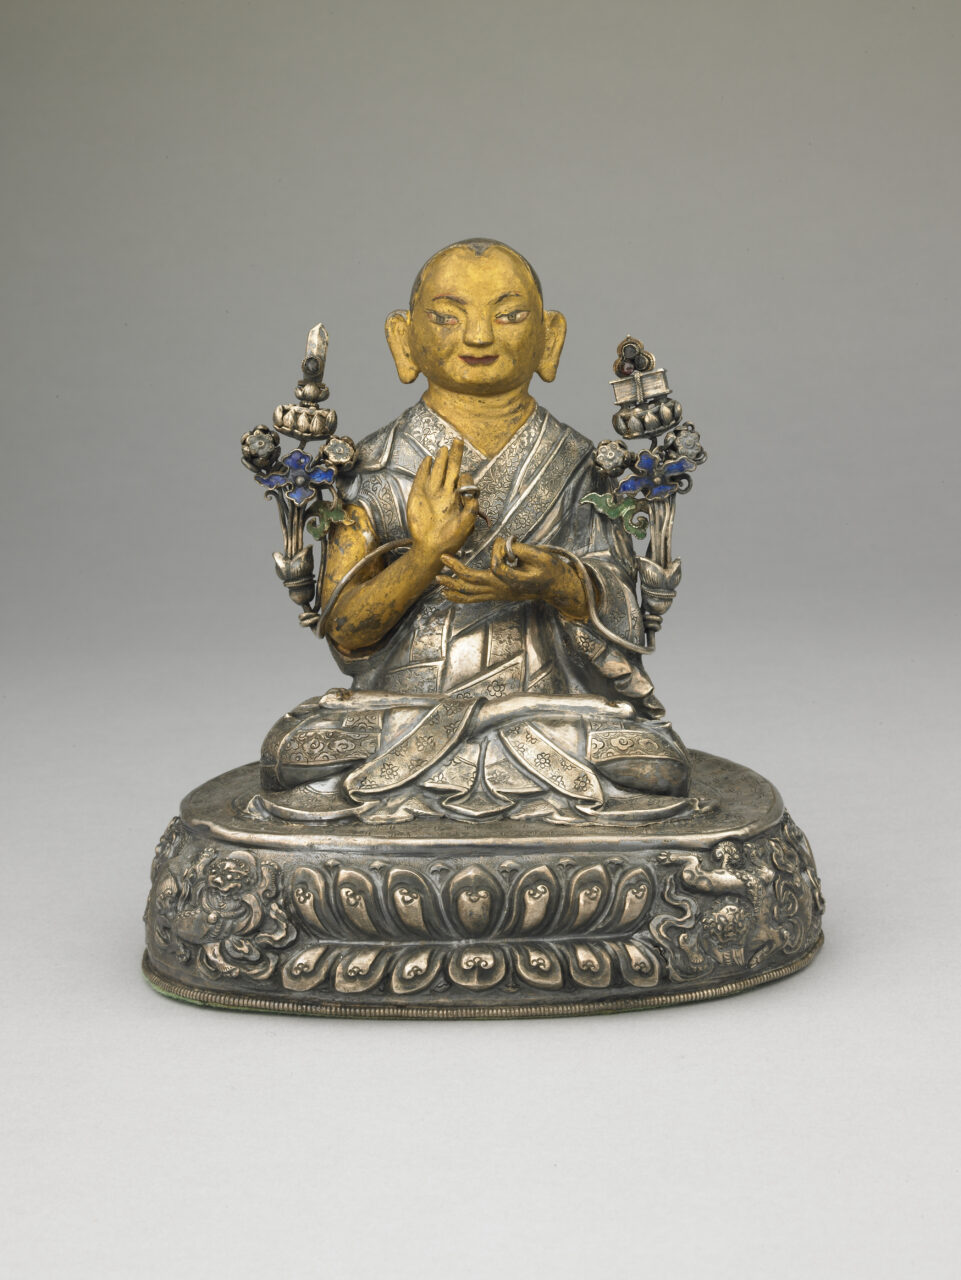 Gold- and silver-colored sculpture depicting monk wearing pleated robe, holding long-stemmed blossoms in hands